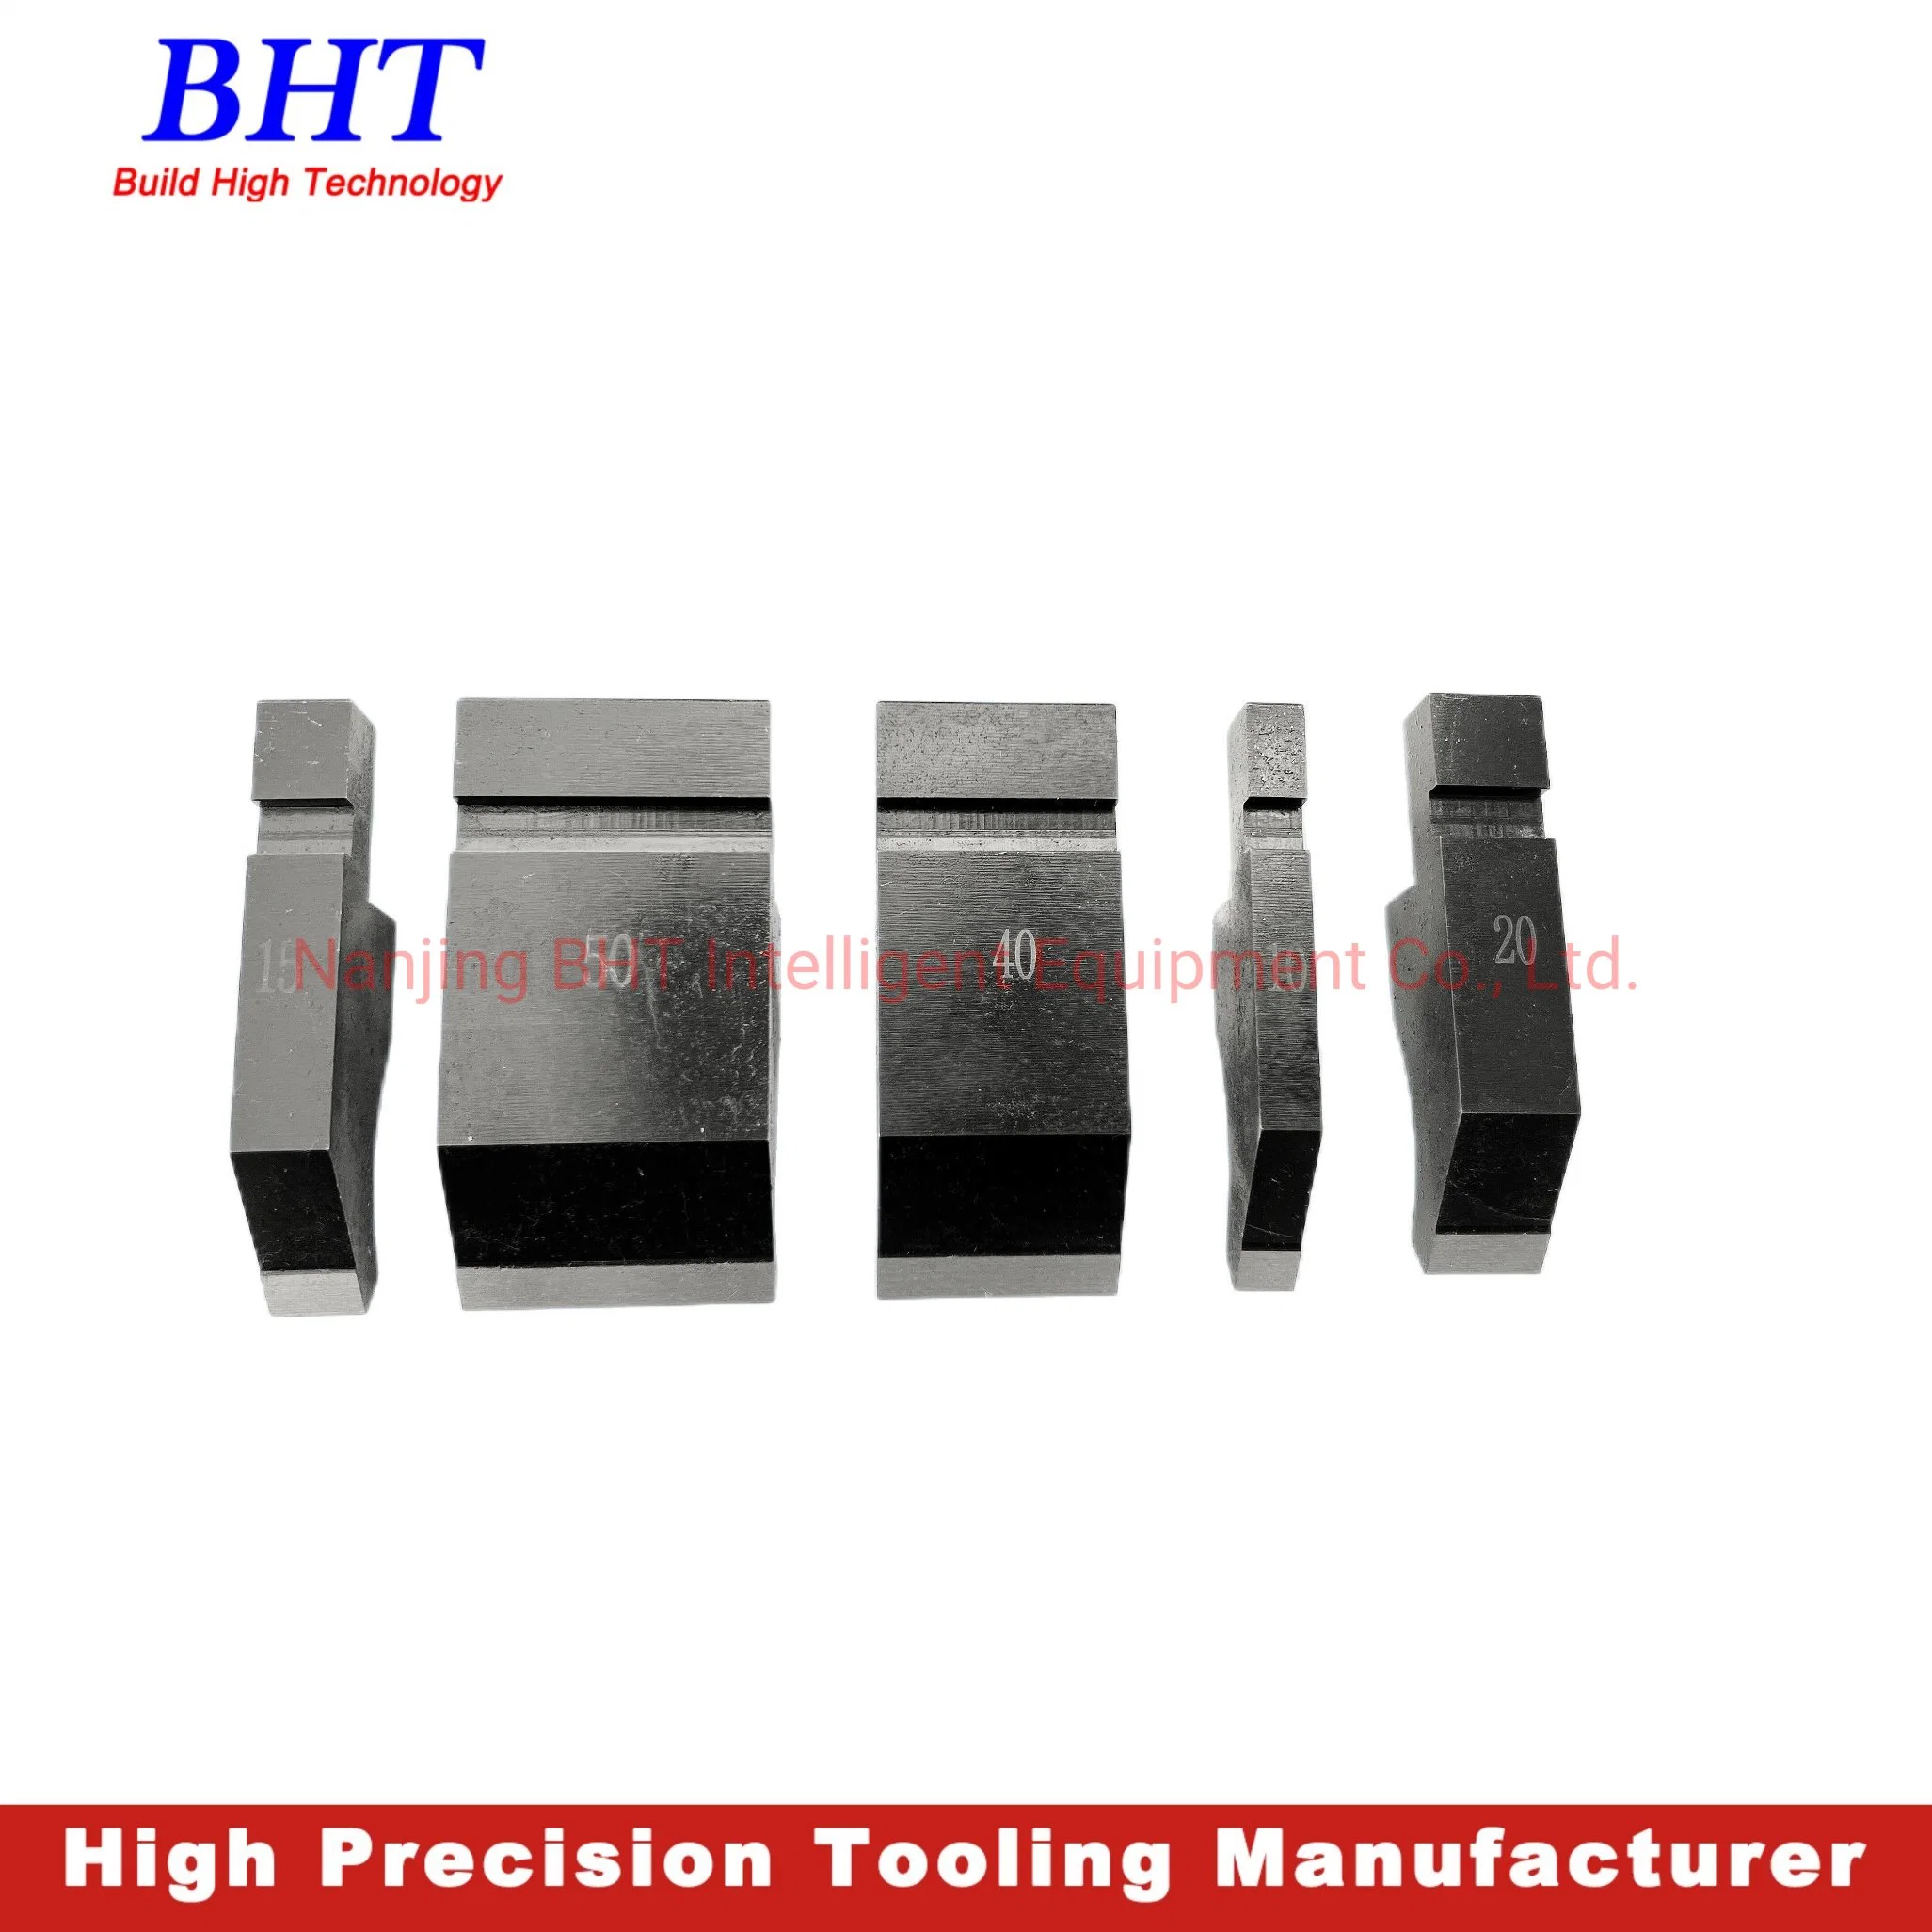 Stock Press Brake Punch Tool 80 Degree with Black Coating Used in Bending Machine